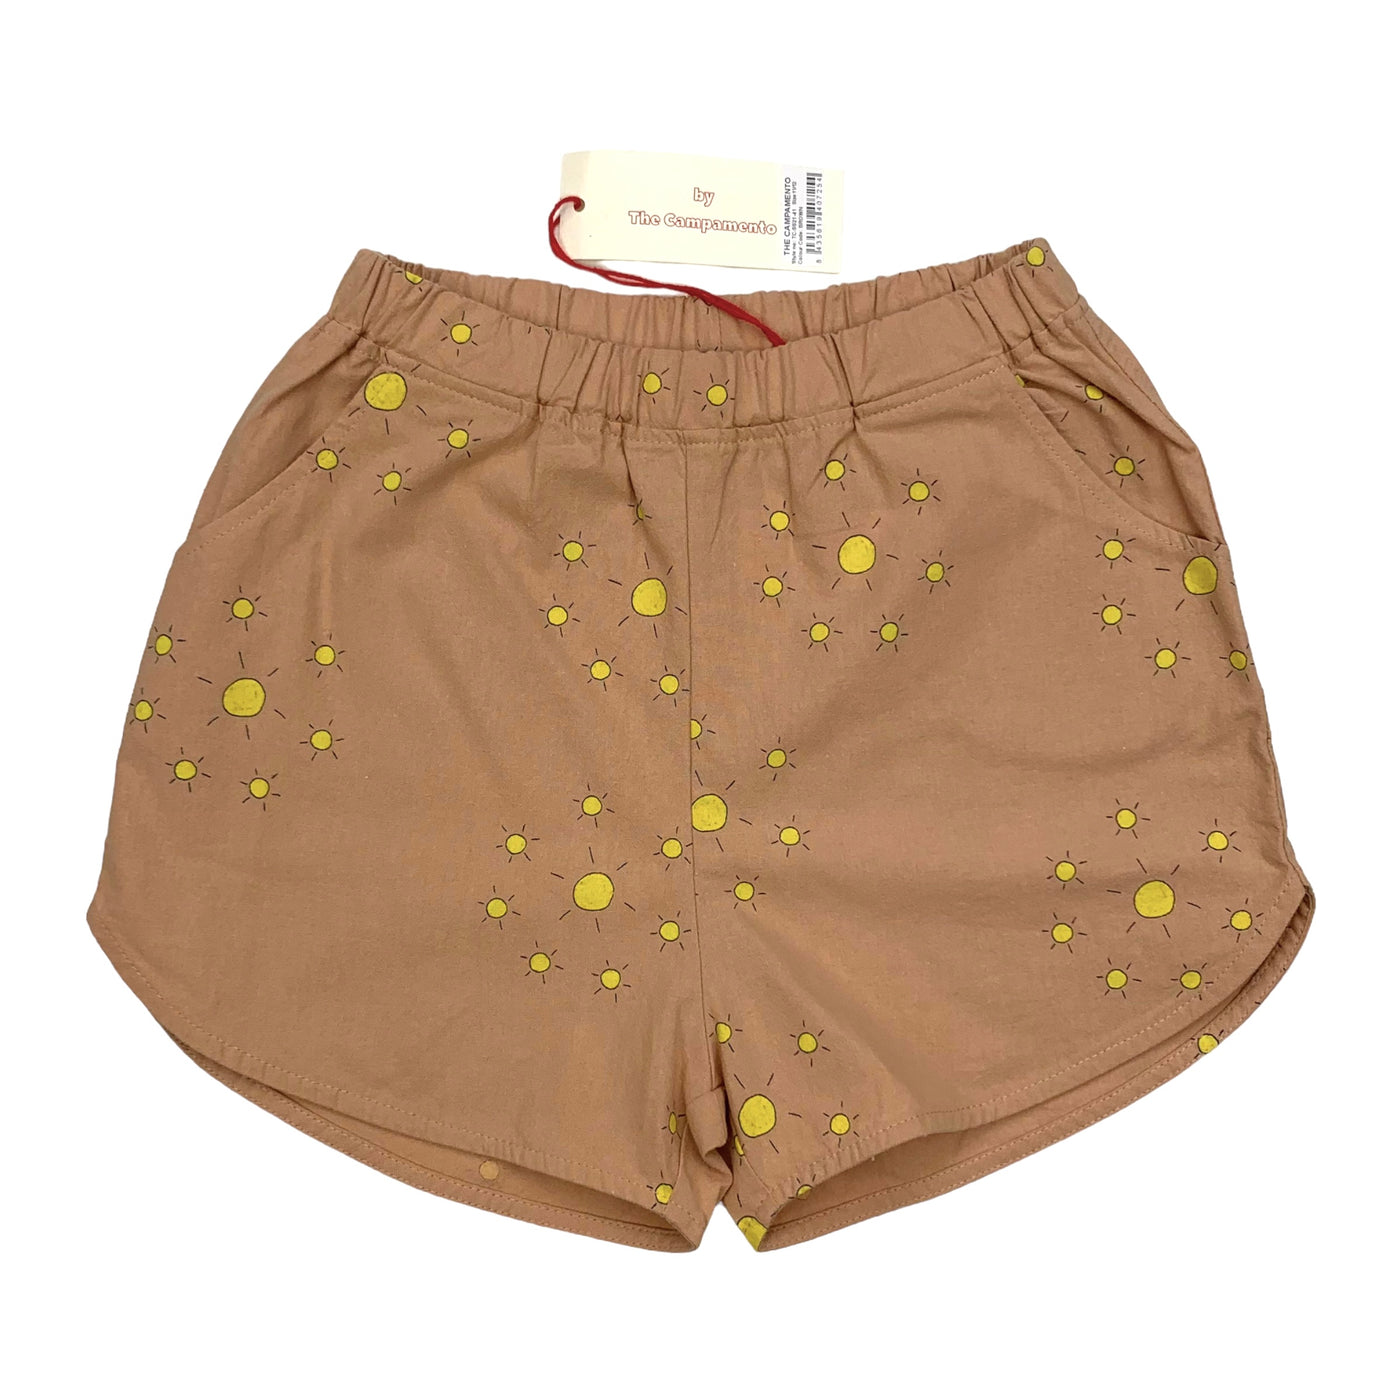 The campamento shorts nude with sun print size 11 - 12y NEW